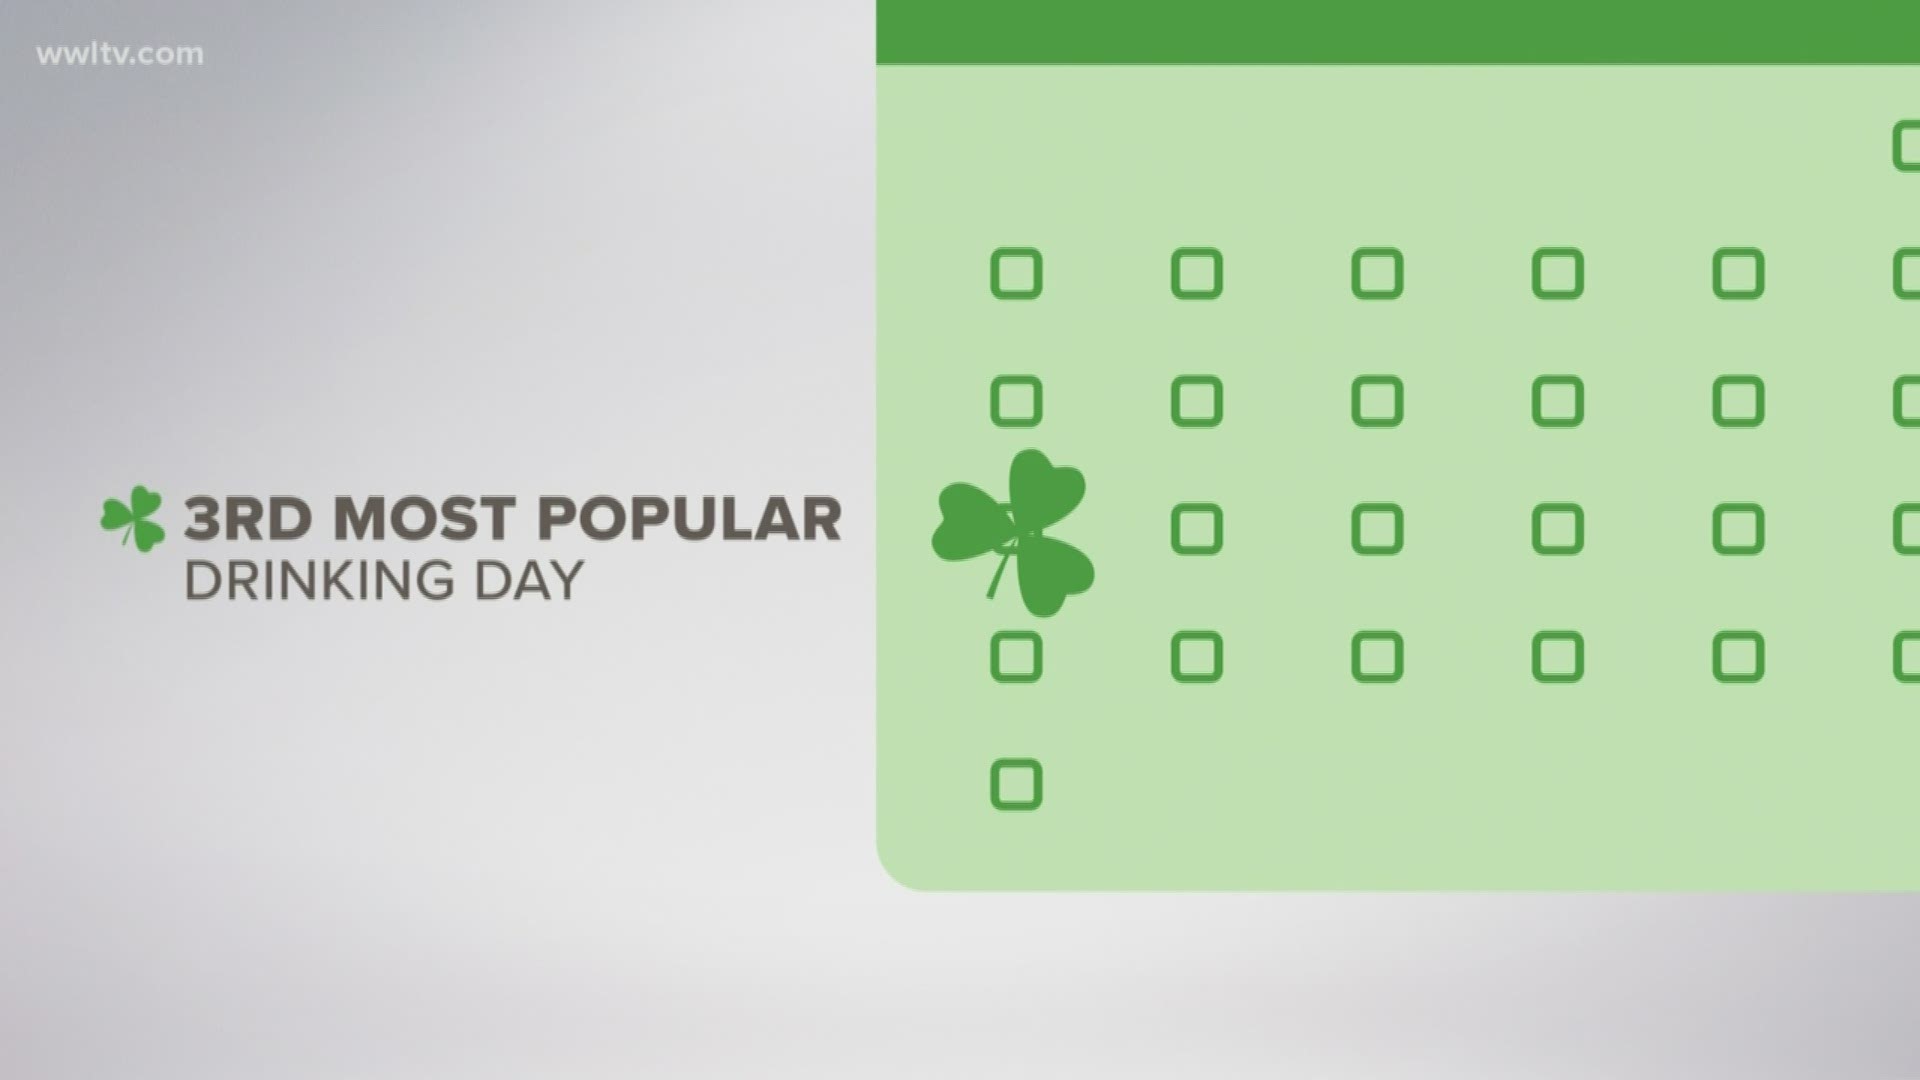 St. Patrick's Day is the 3rd most popular drinking day in Louisiana, behind New Year's Eve and Mardi Gras Day.